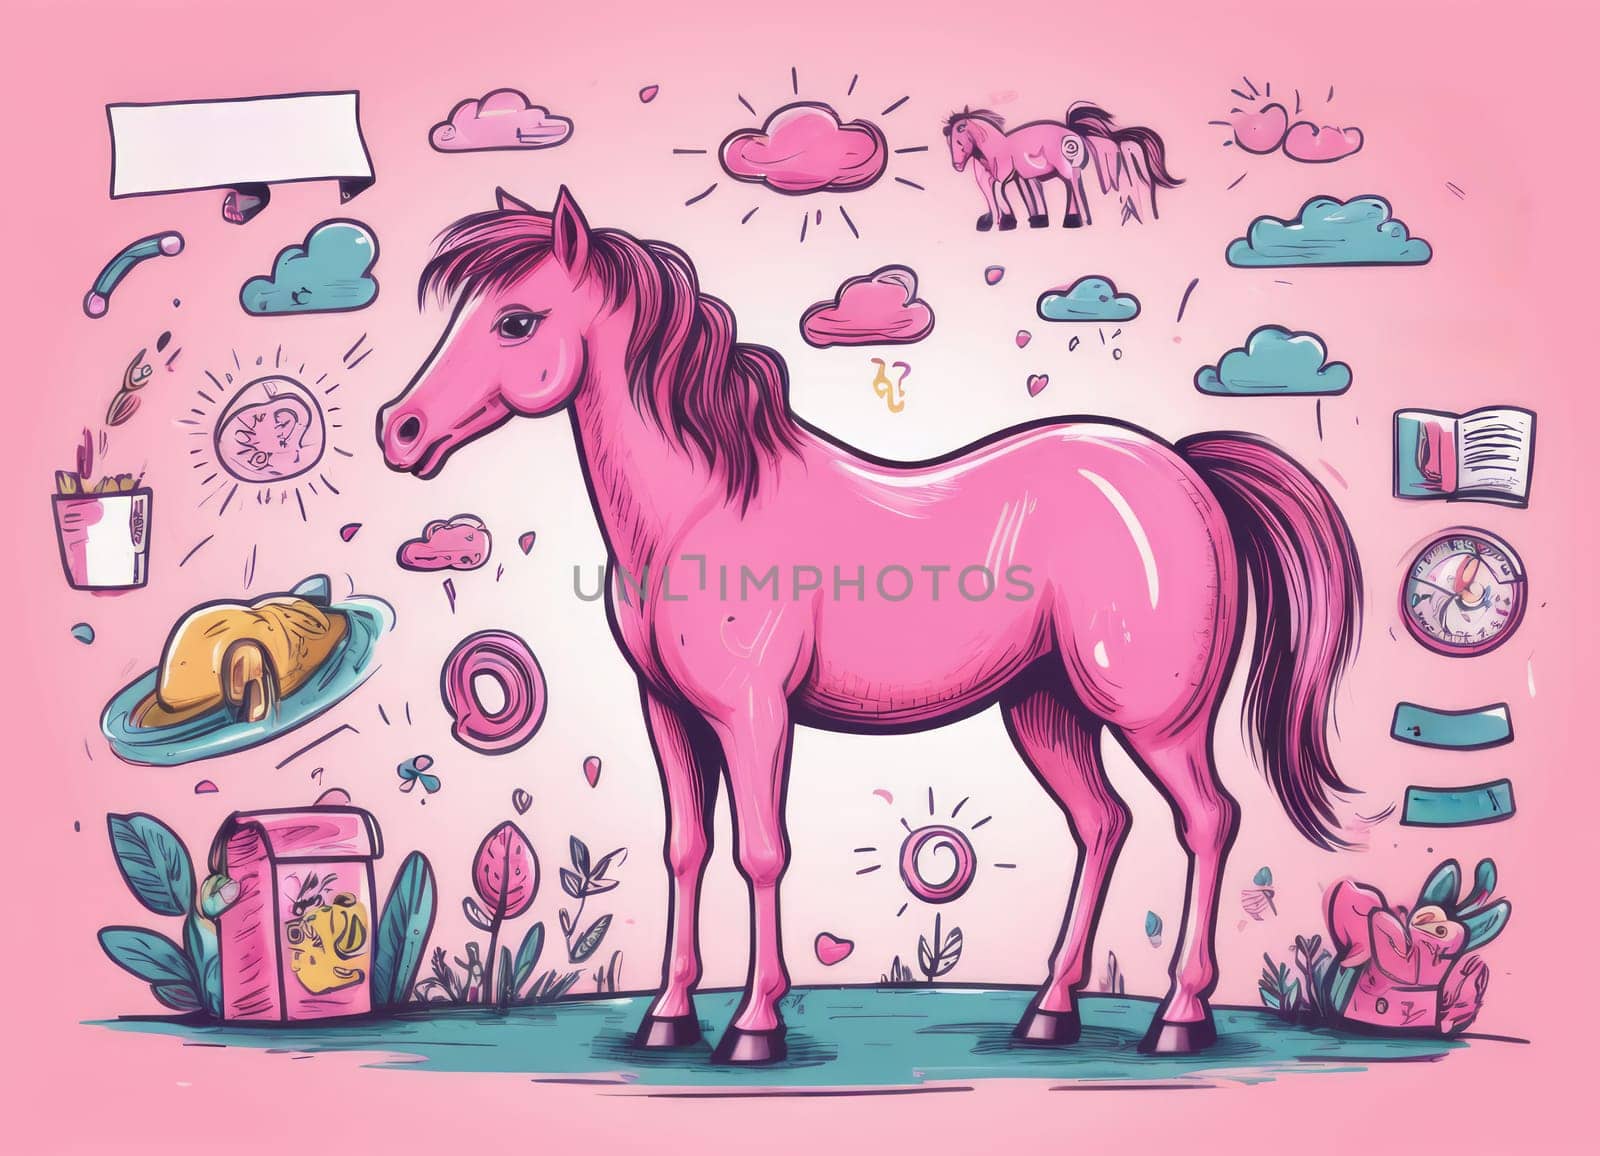 Colorful illustration of a pink horse by Andre1ns